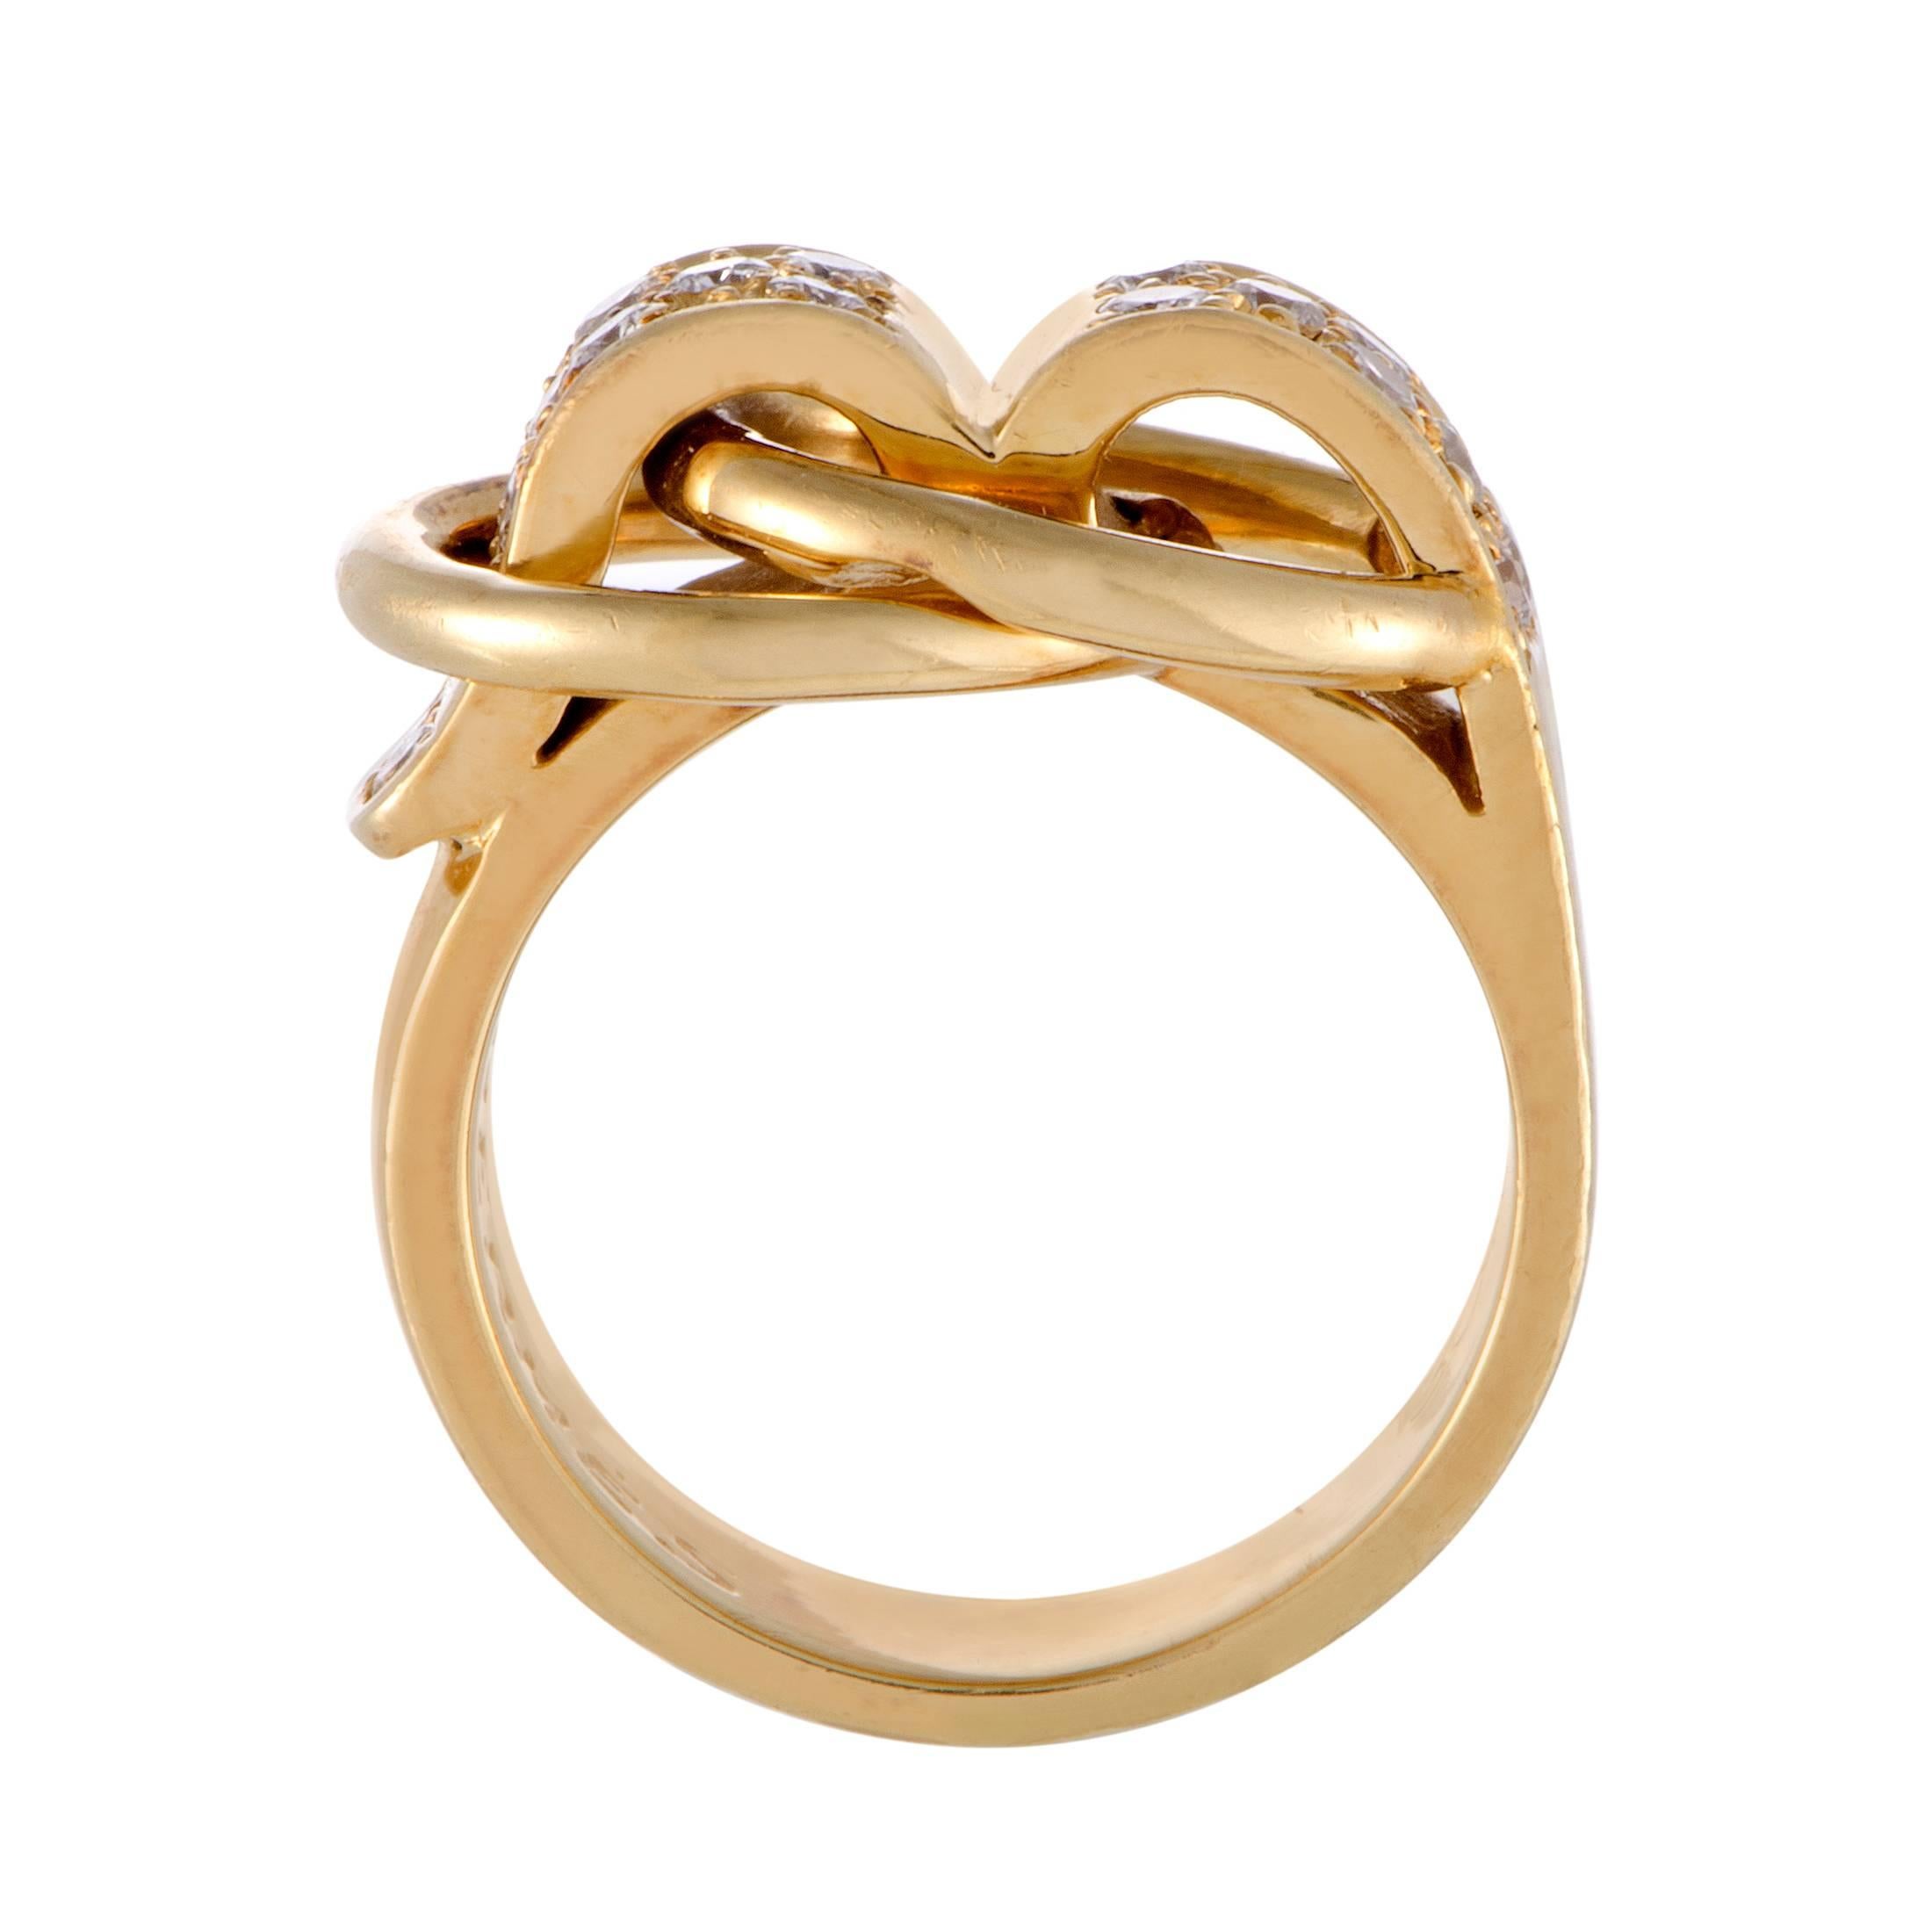 Featuring the distinct design elements the brand is known for, this splendid ring boasts an exquisitely offbeat, fashionable allure. Presented by Hermès, the ring is made of 18K yellow gold and set with a total of 0.50 carats of sparkly